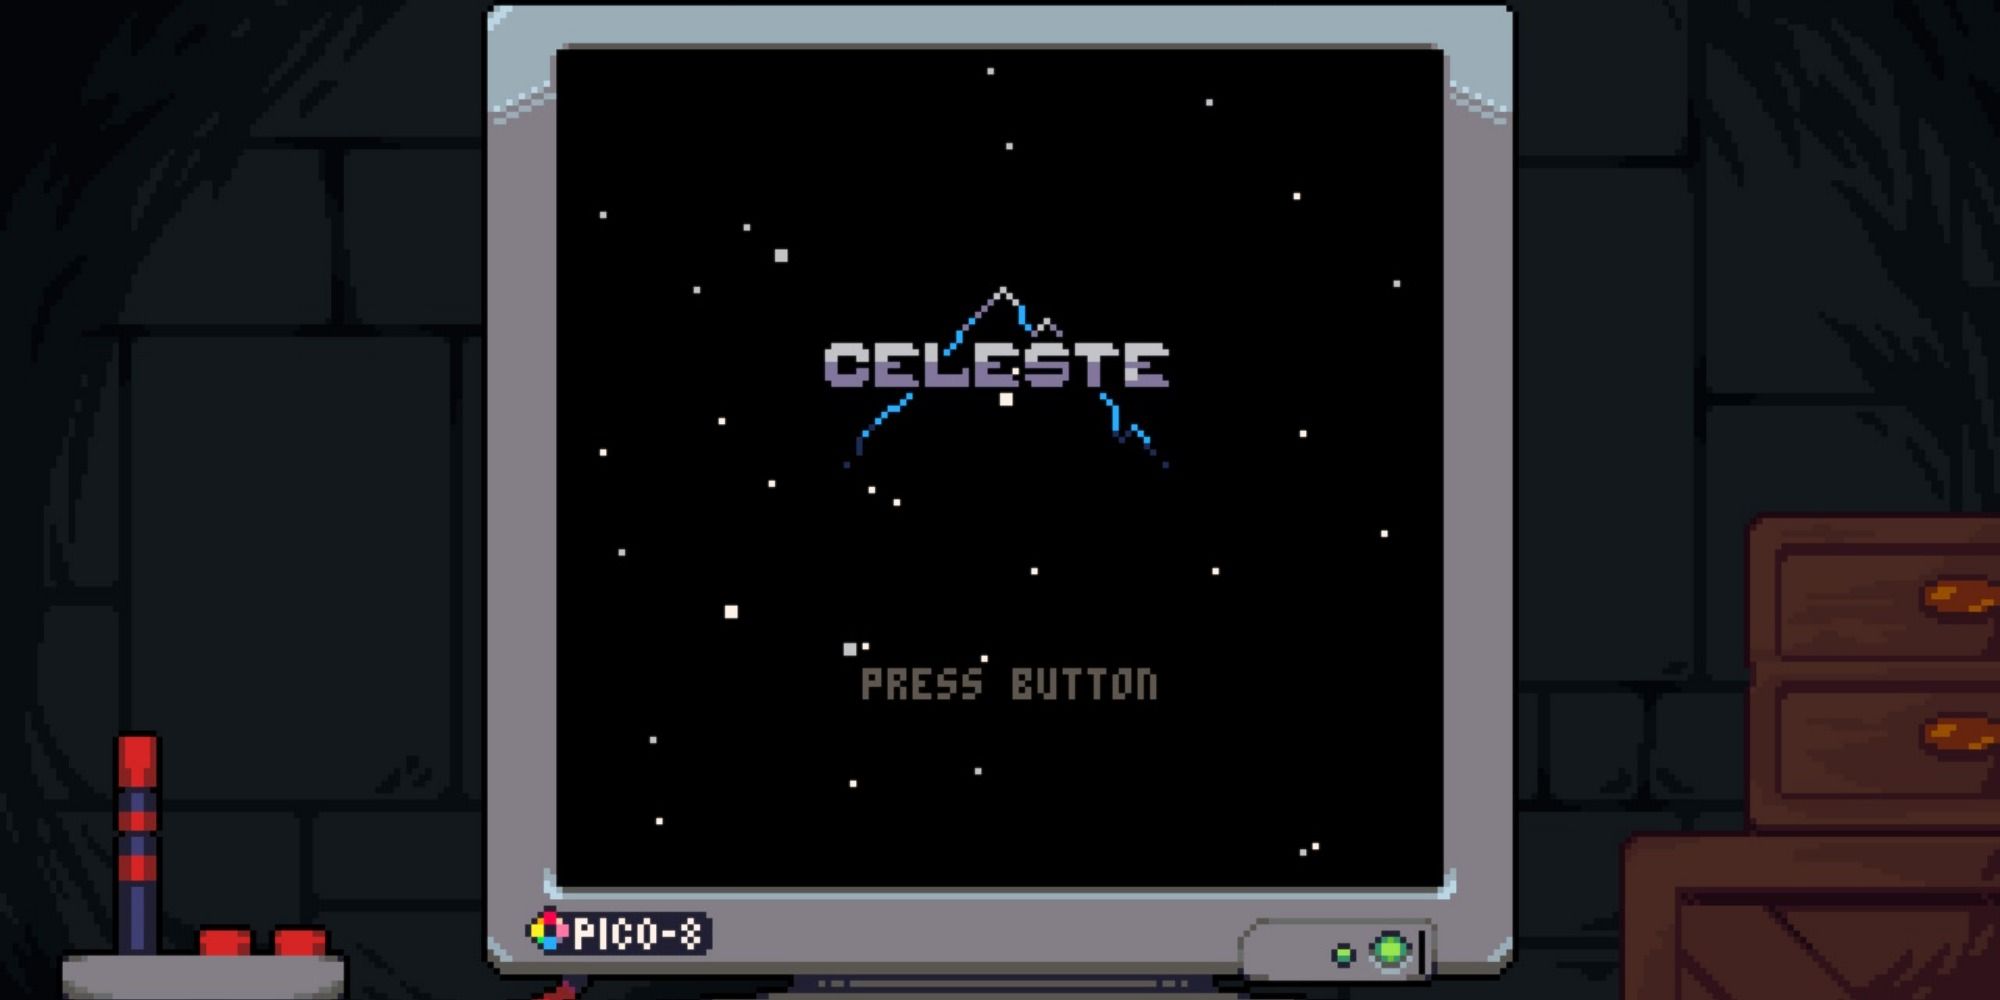 A pixel art stone tiled room contains a computer monitor labeled Pico 8 and displays a screen with a pixel mountain and the text "Celeste"